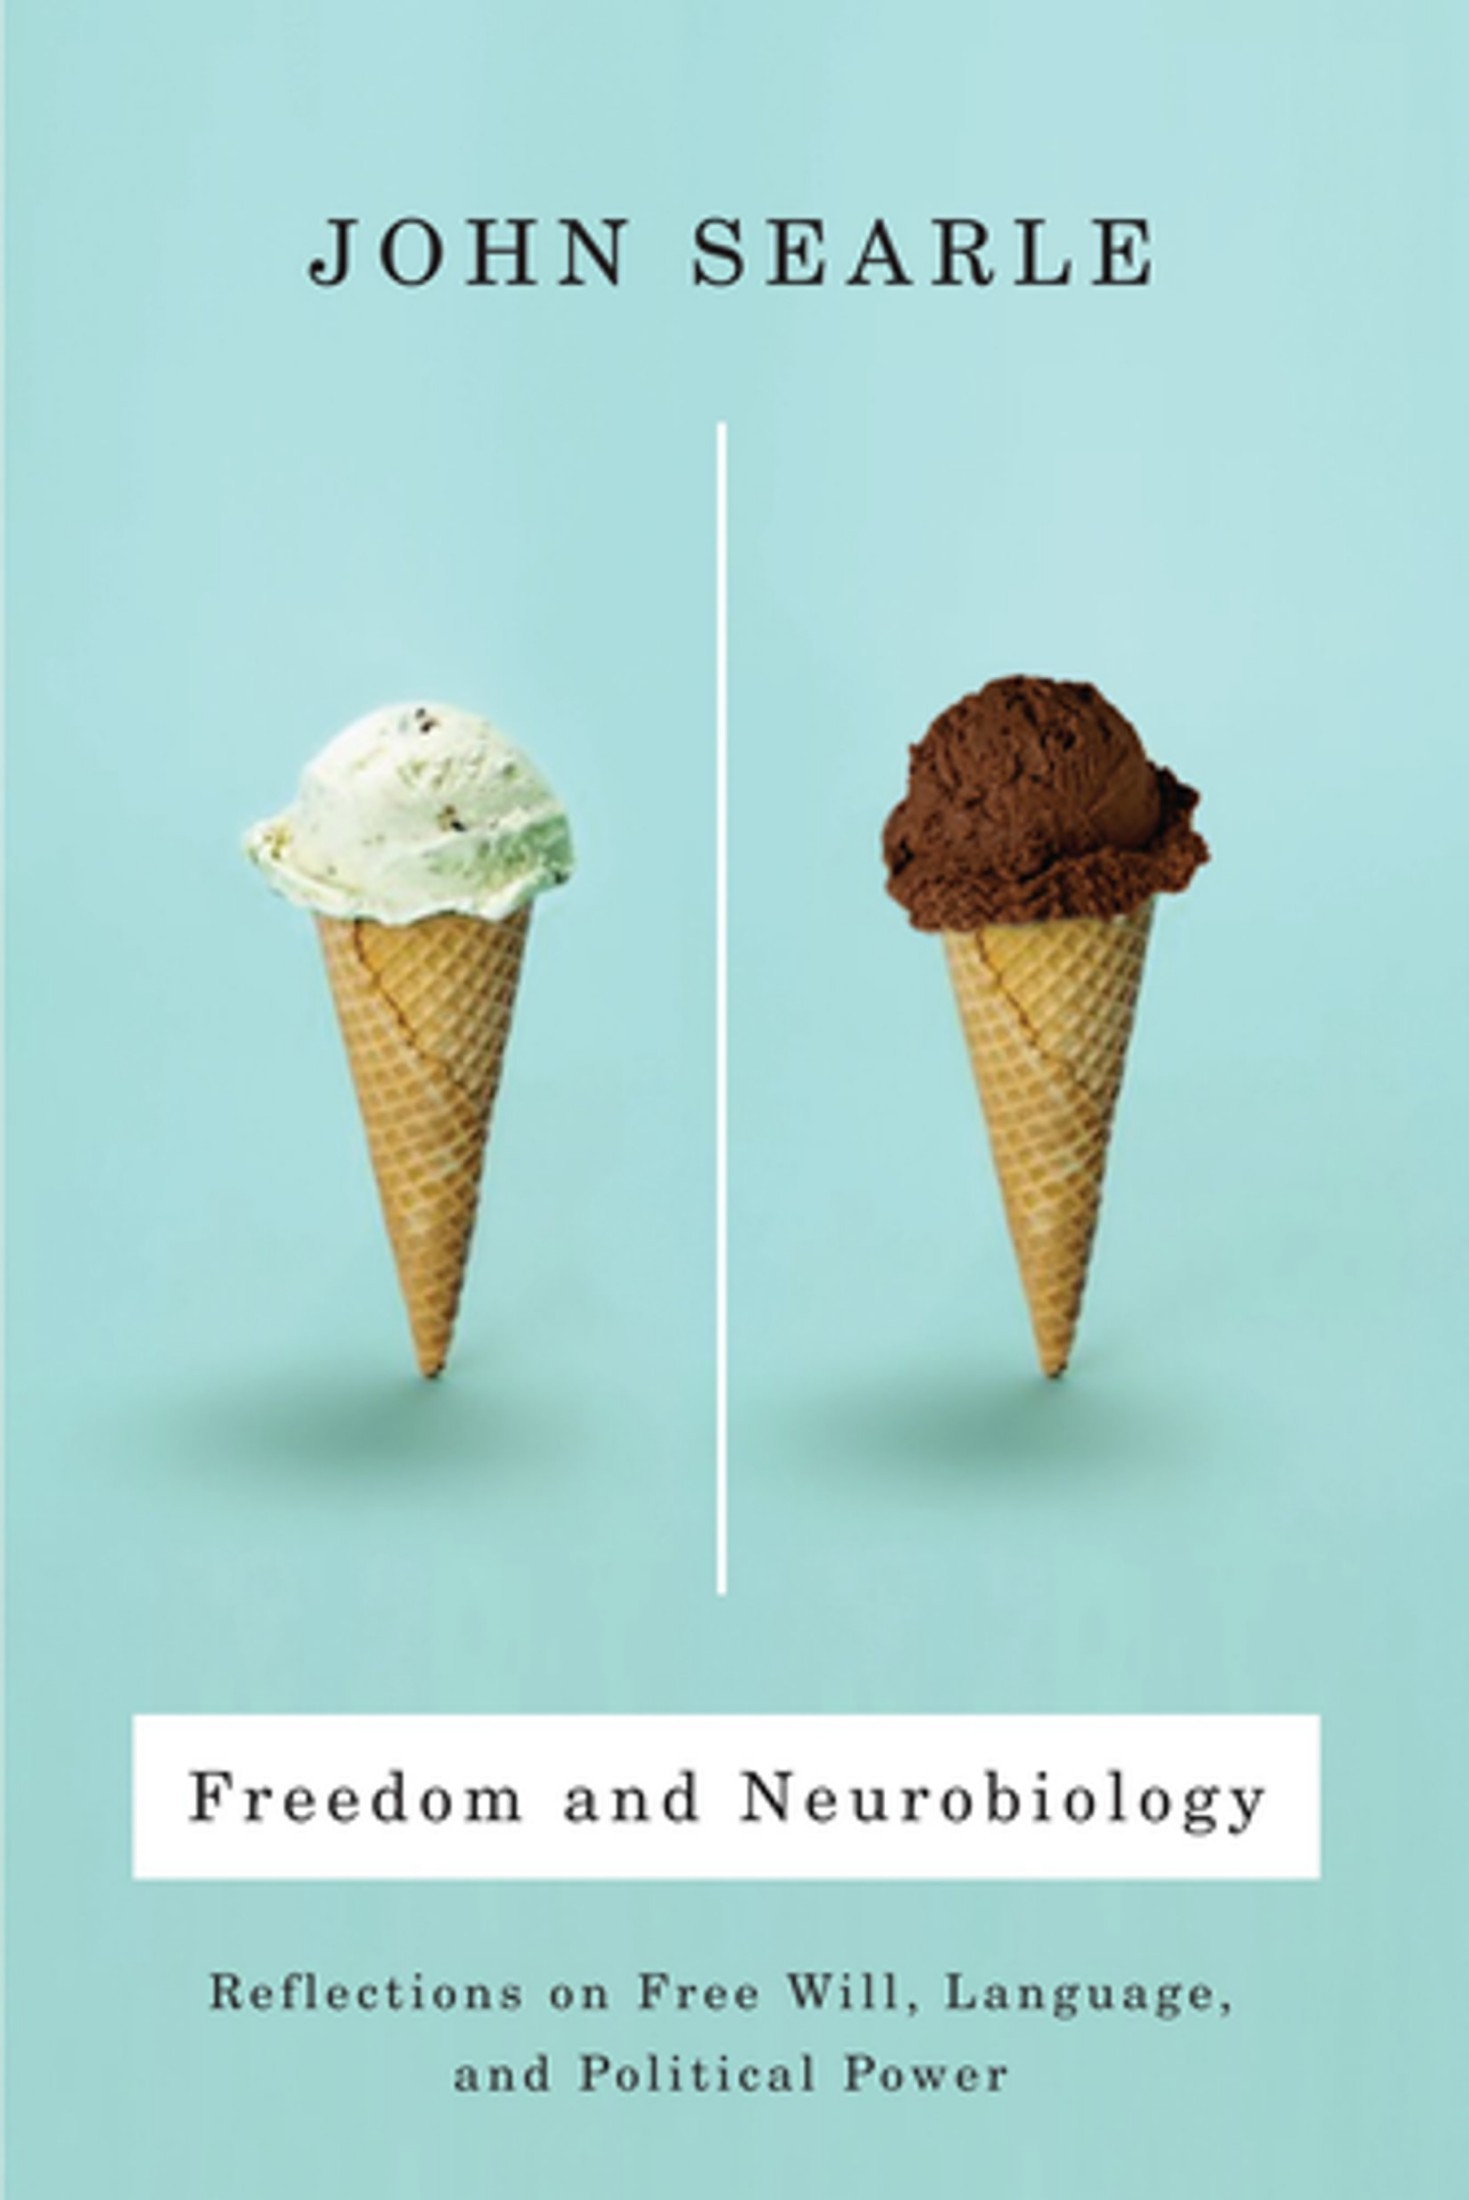 Freedom and Neurobiology Reflections on Free Will, Language, and Political Power